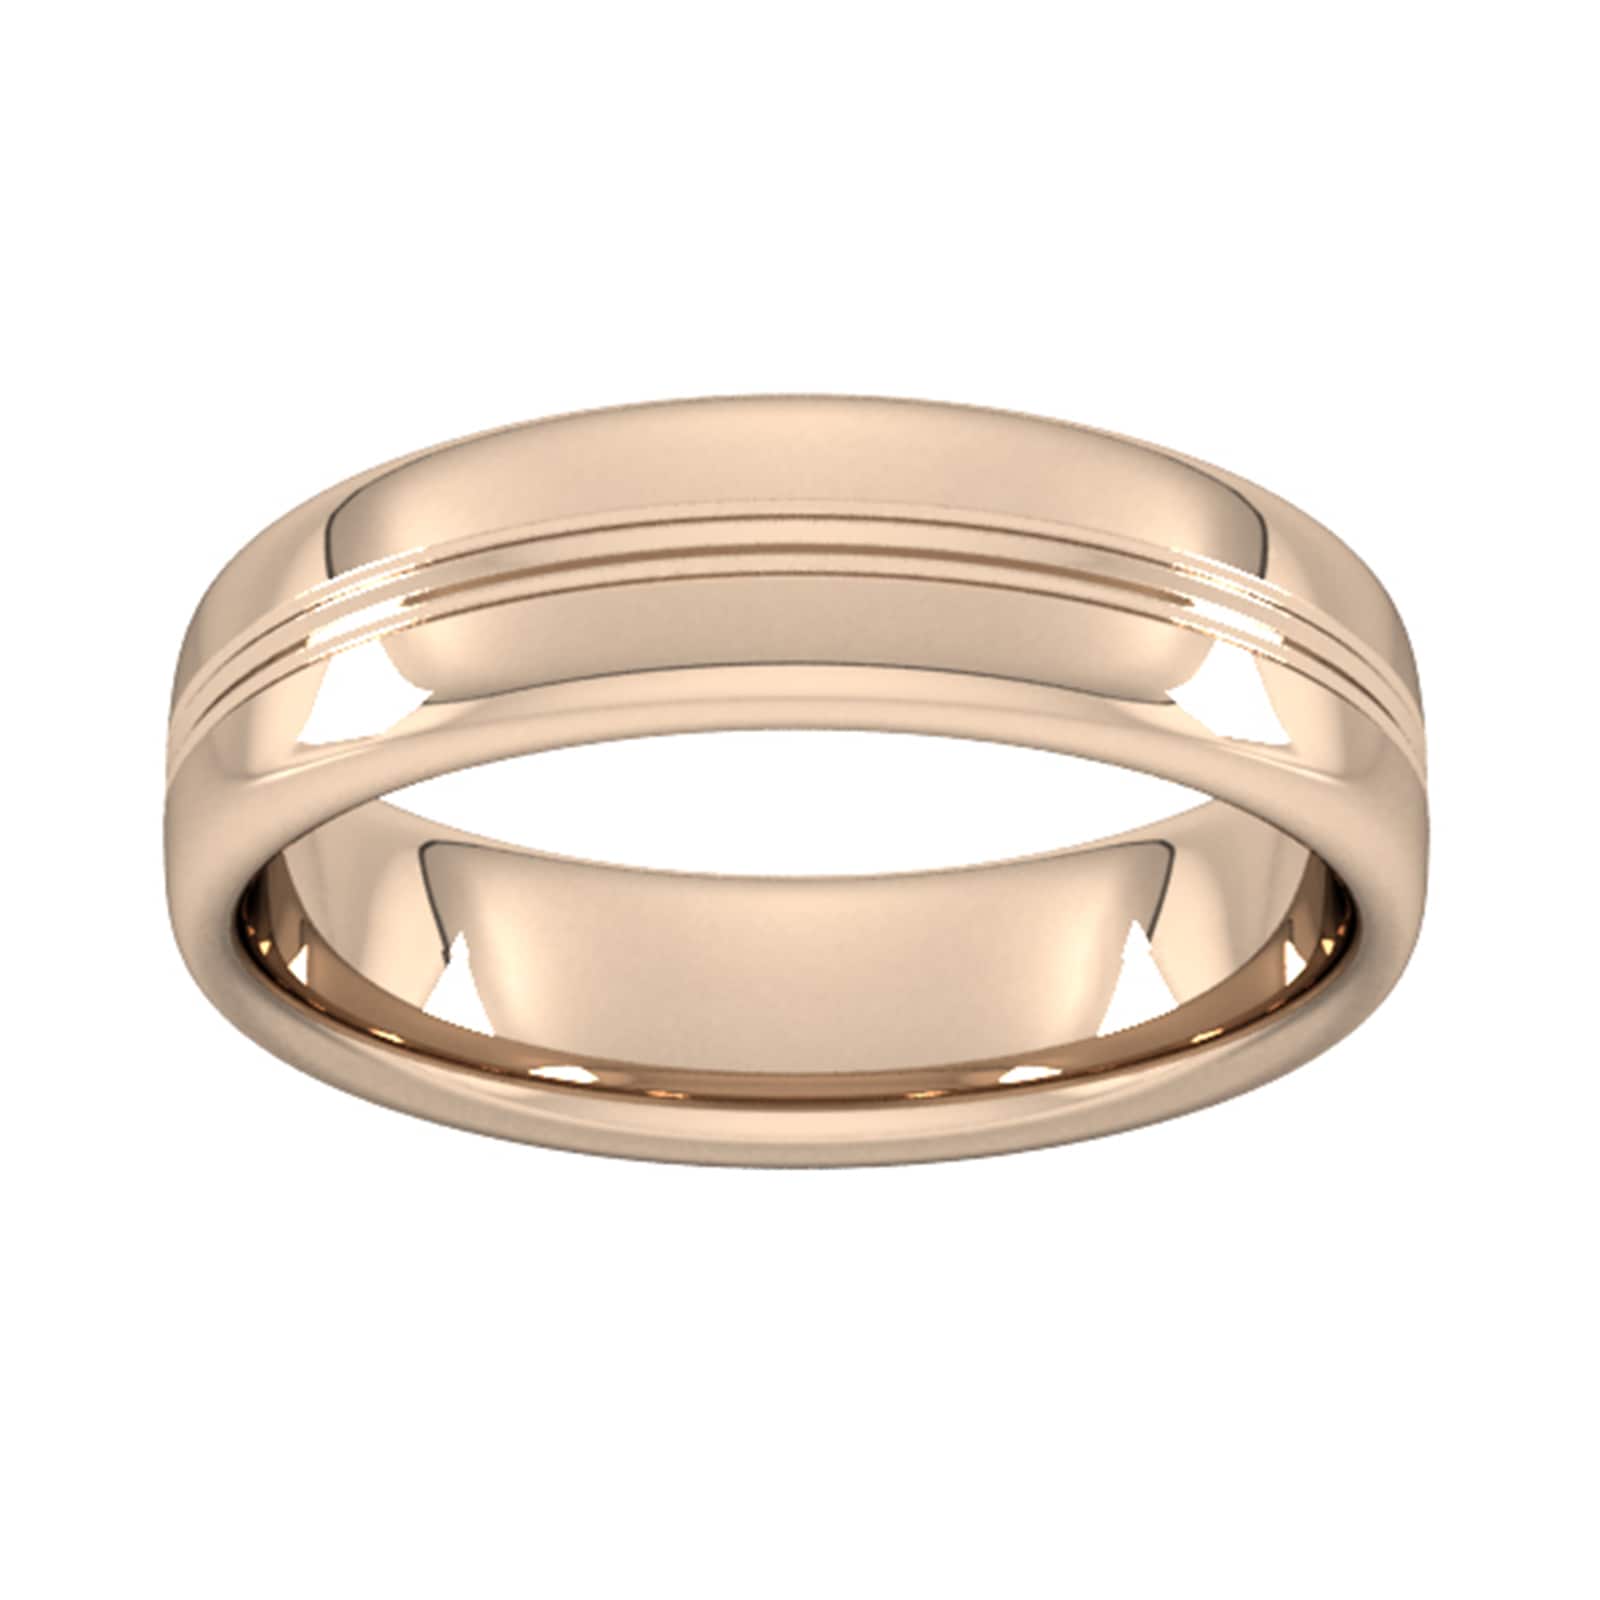 6mm Slight Court Heavy Grooved Polished Finish Wedding Ring In 9 Carat Rose Gold - Ring Size K